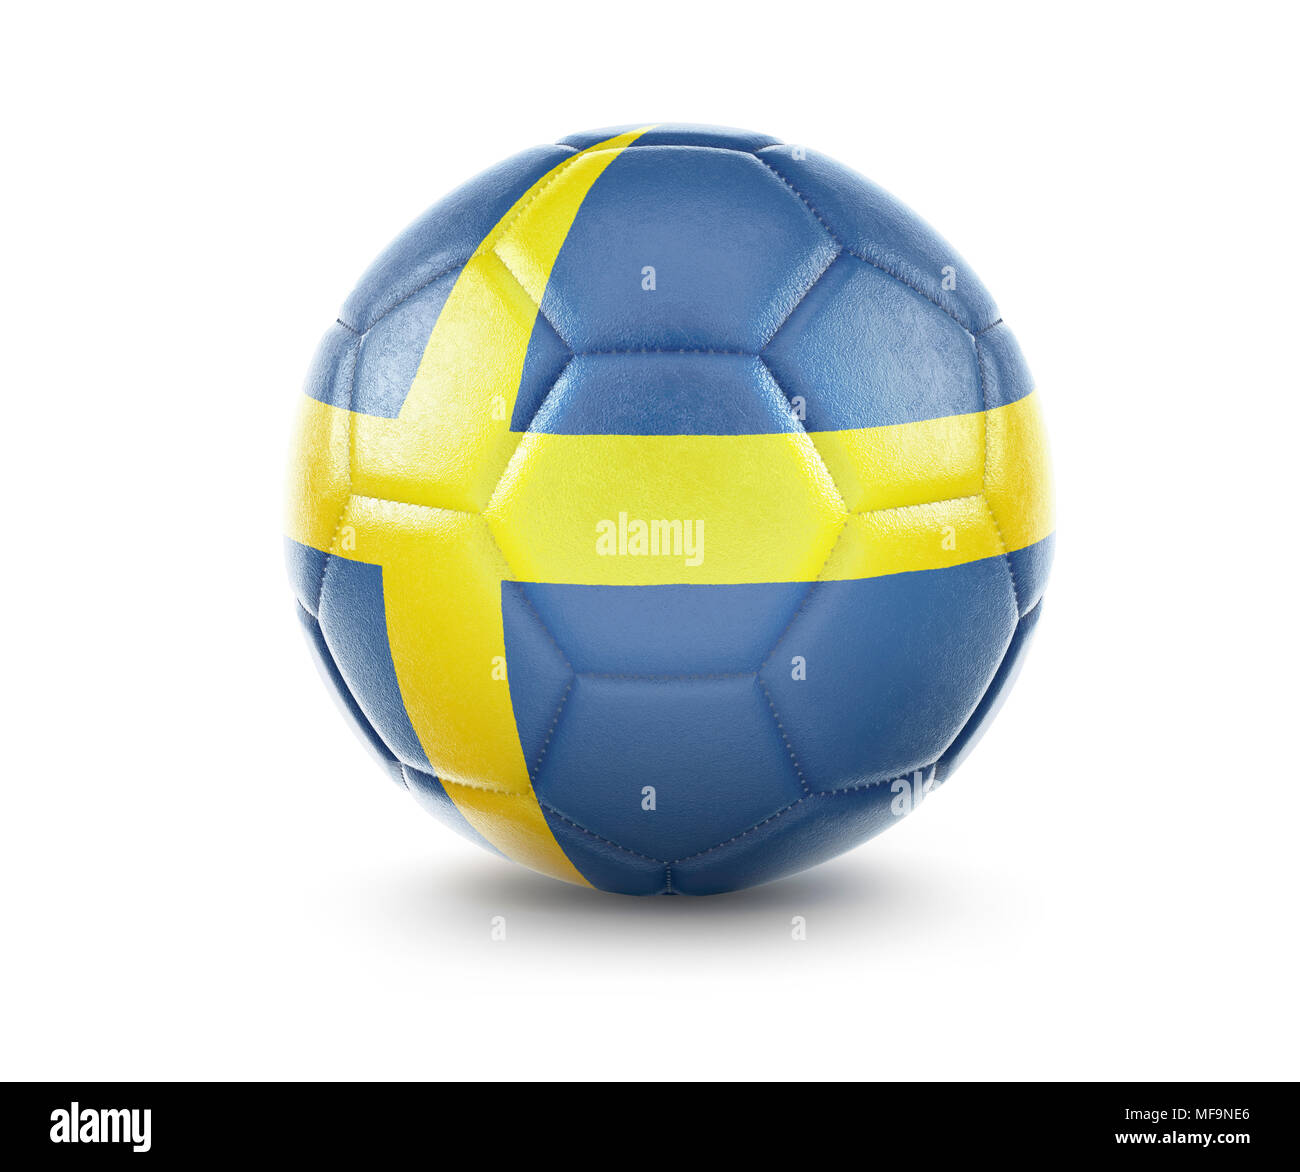 High qualitiy rendering of a soccer ball with the flag of Sweden.(series) Stock Photo